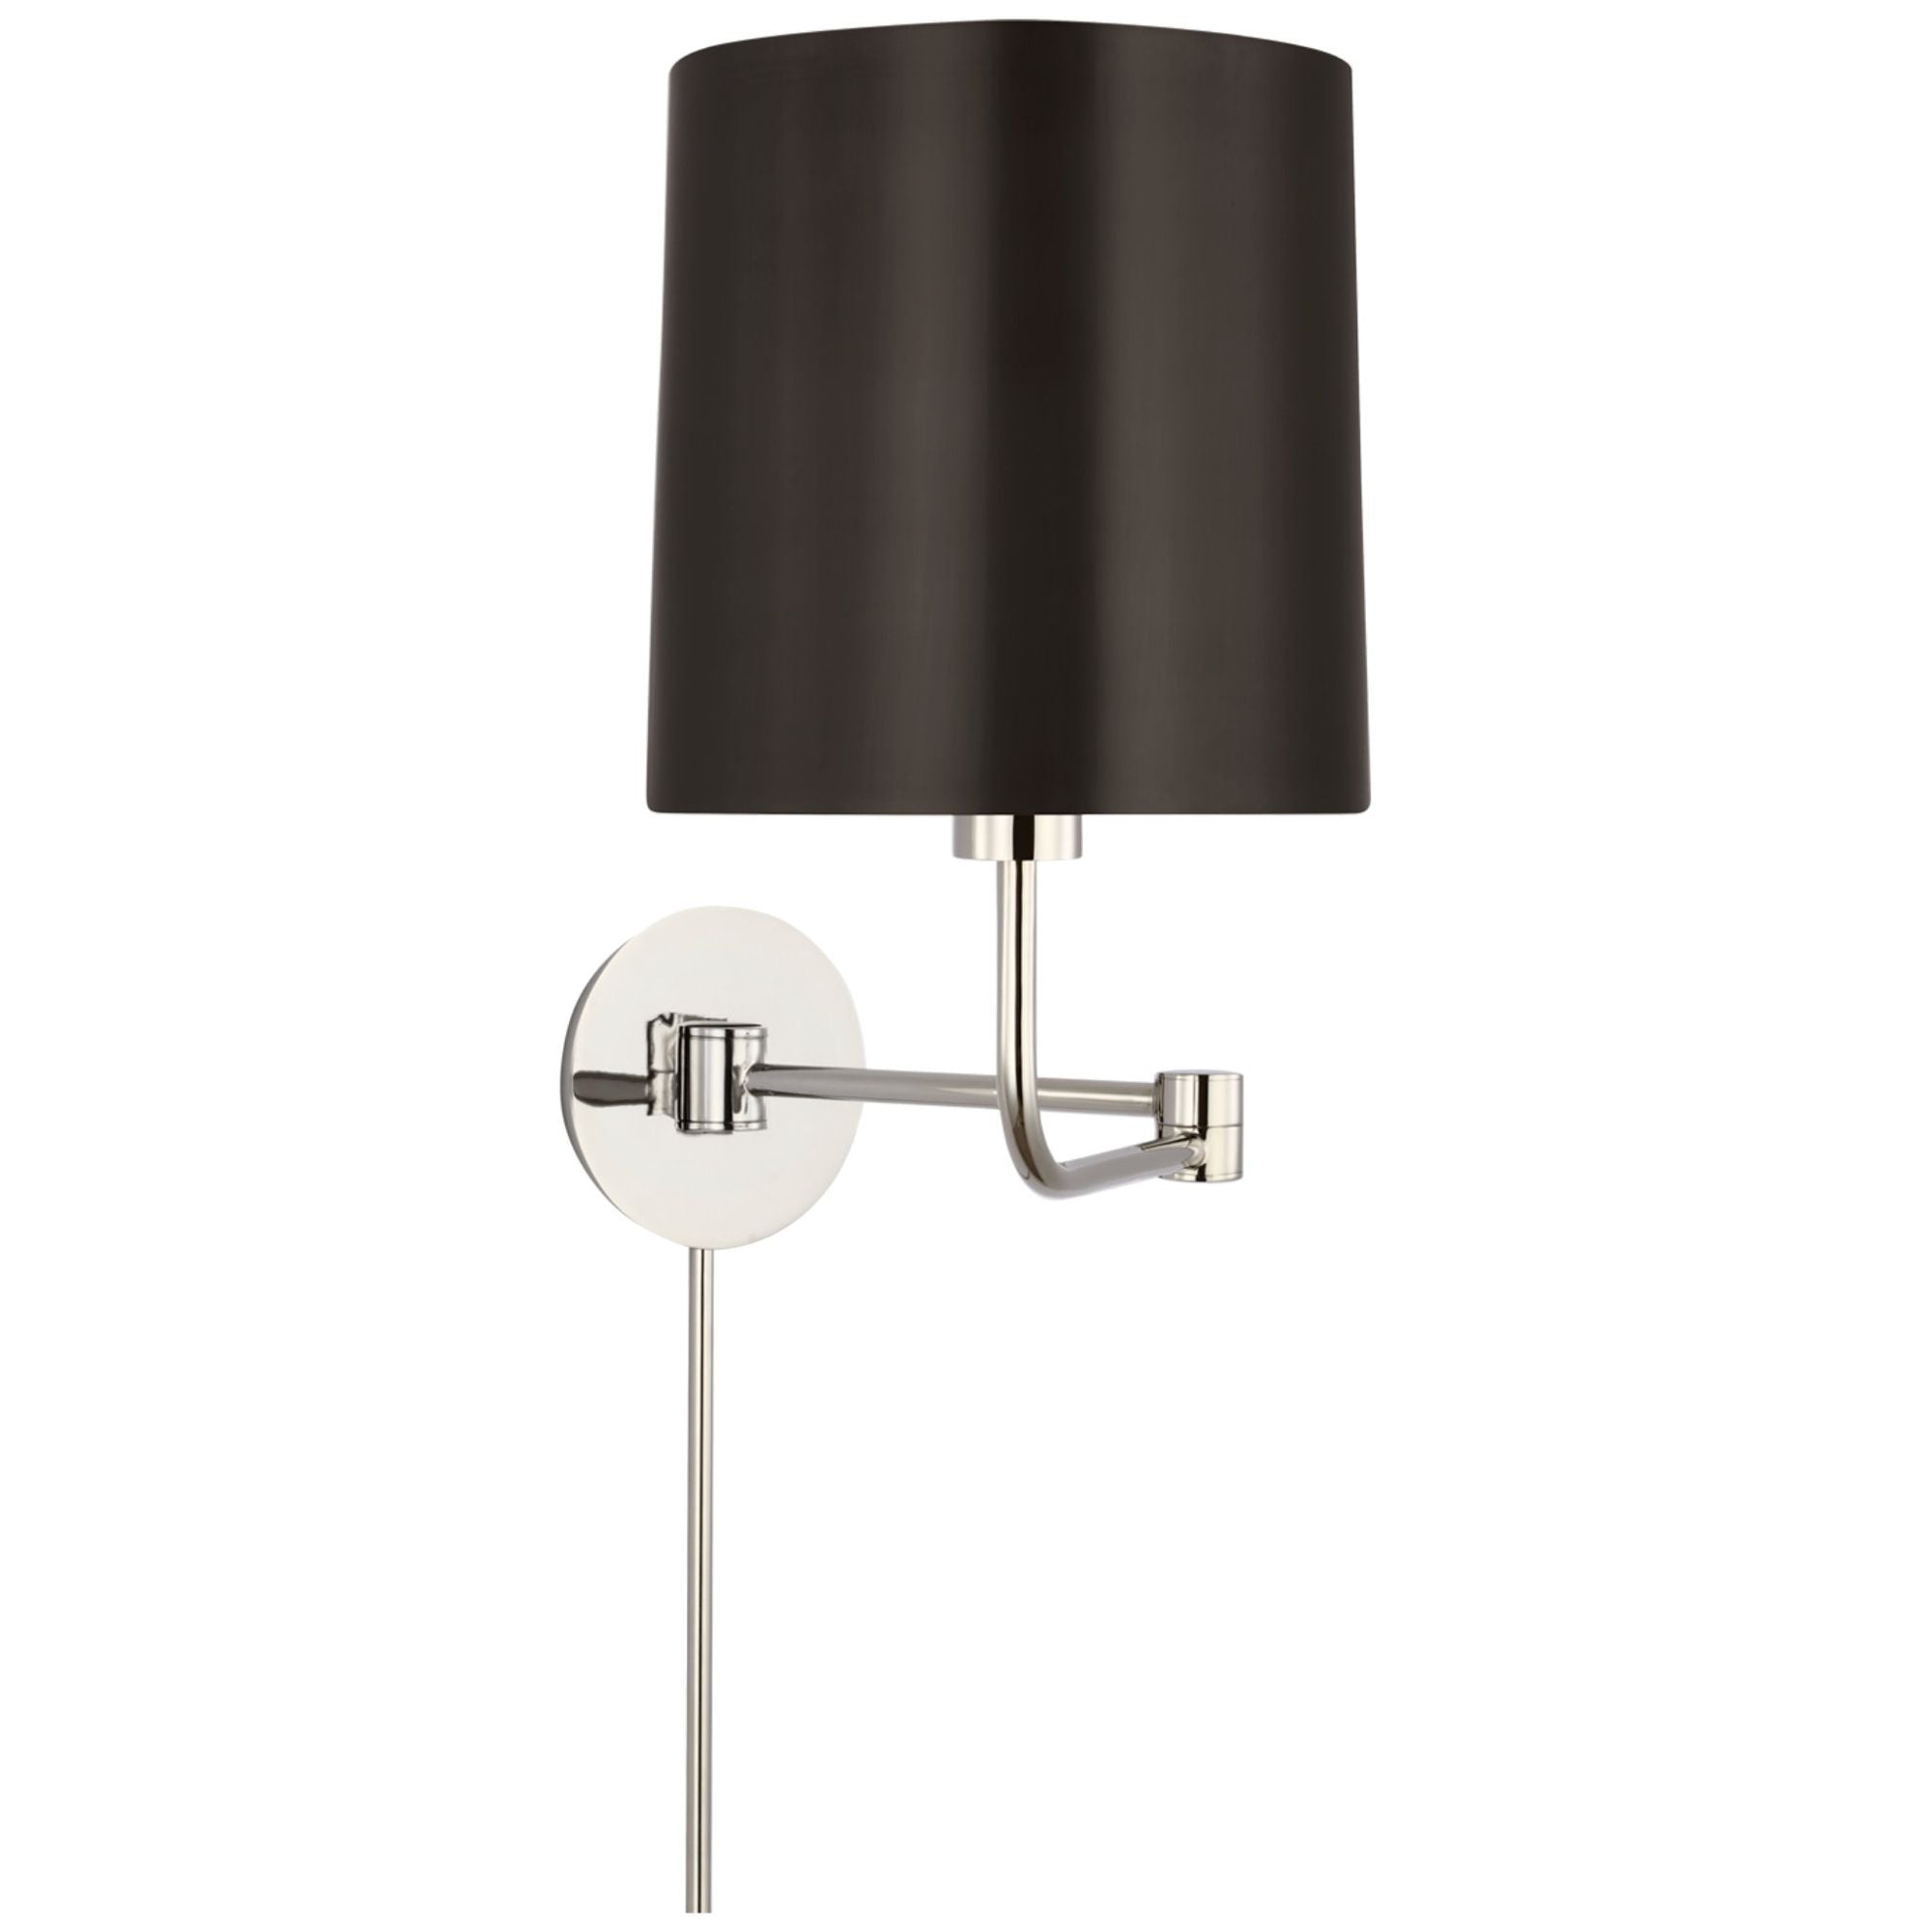 Barbara Barry Go Lightly Swing Arm Wall Light in Polished Nickel with Bronze Shade